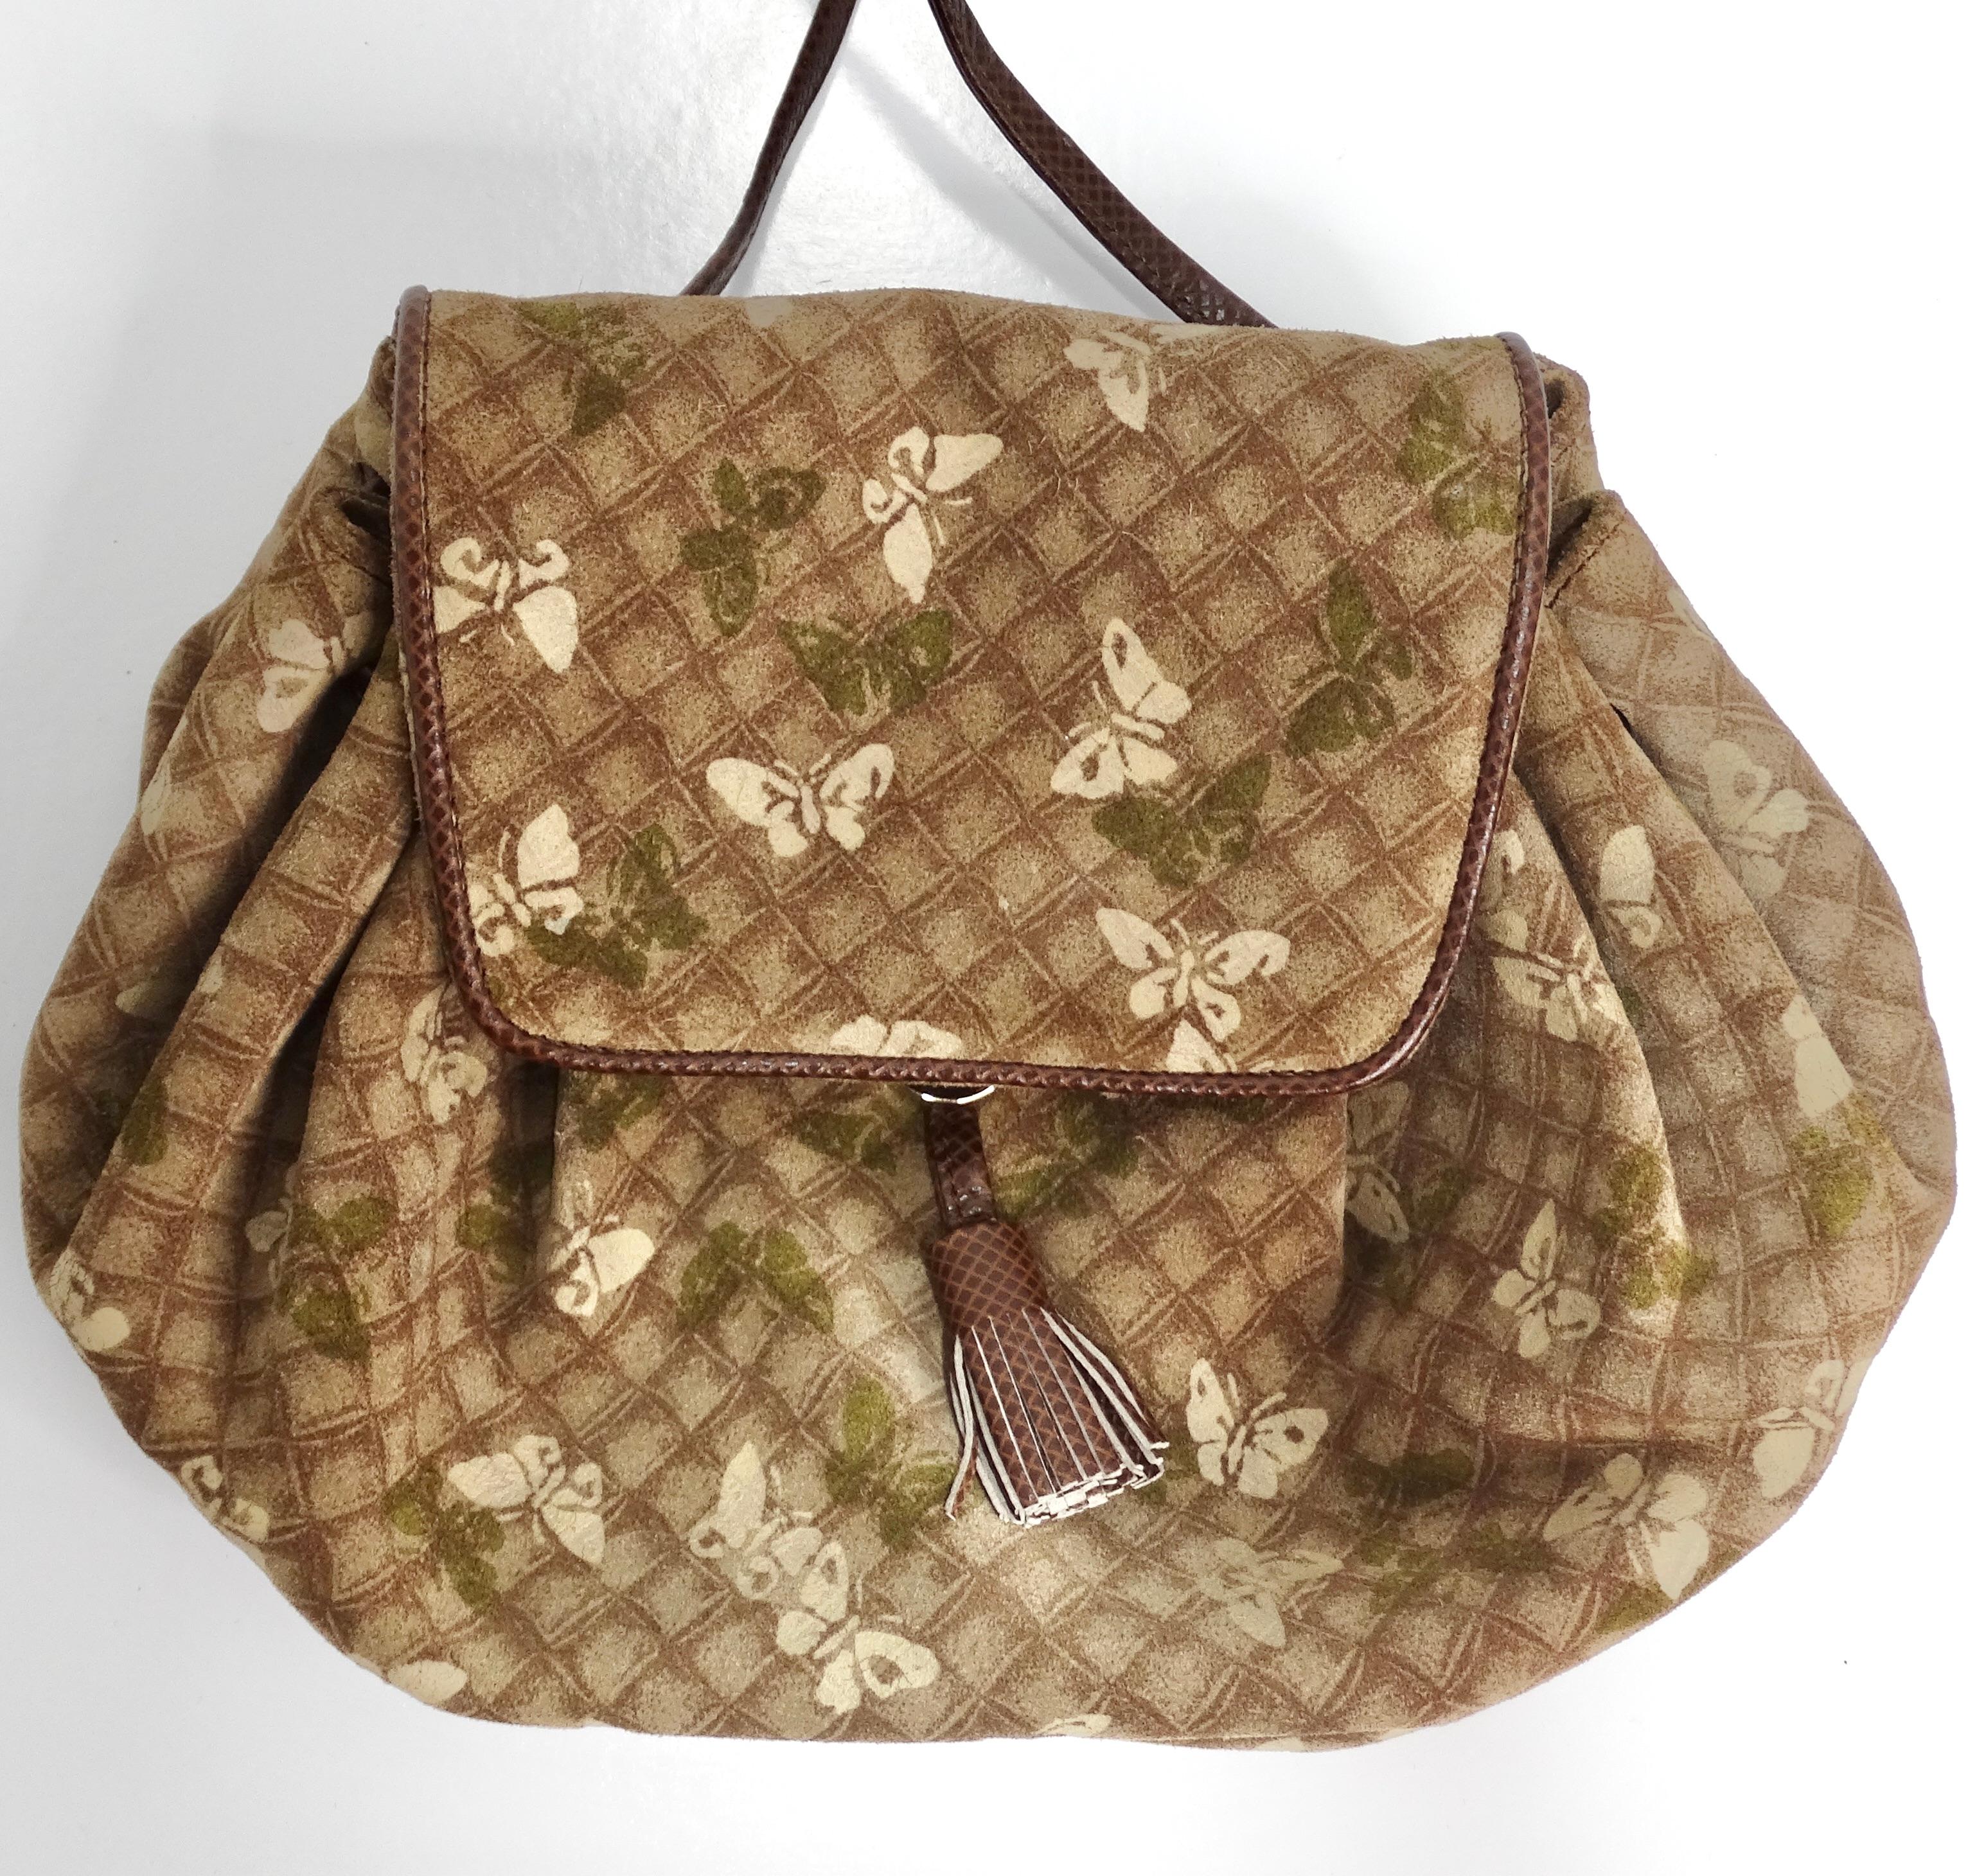 Introducing the stunning Bottega Veneta 1980s Suede Drawstring Handbag, a unique and elegant accessory that combines luxurious materials with timeless design. Crafted from high-quality beige printed suede, this handbag features a captivating print